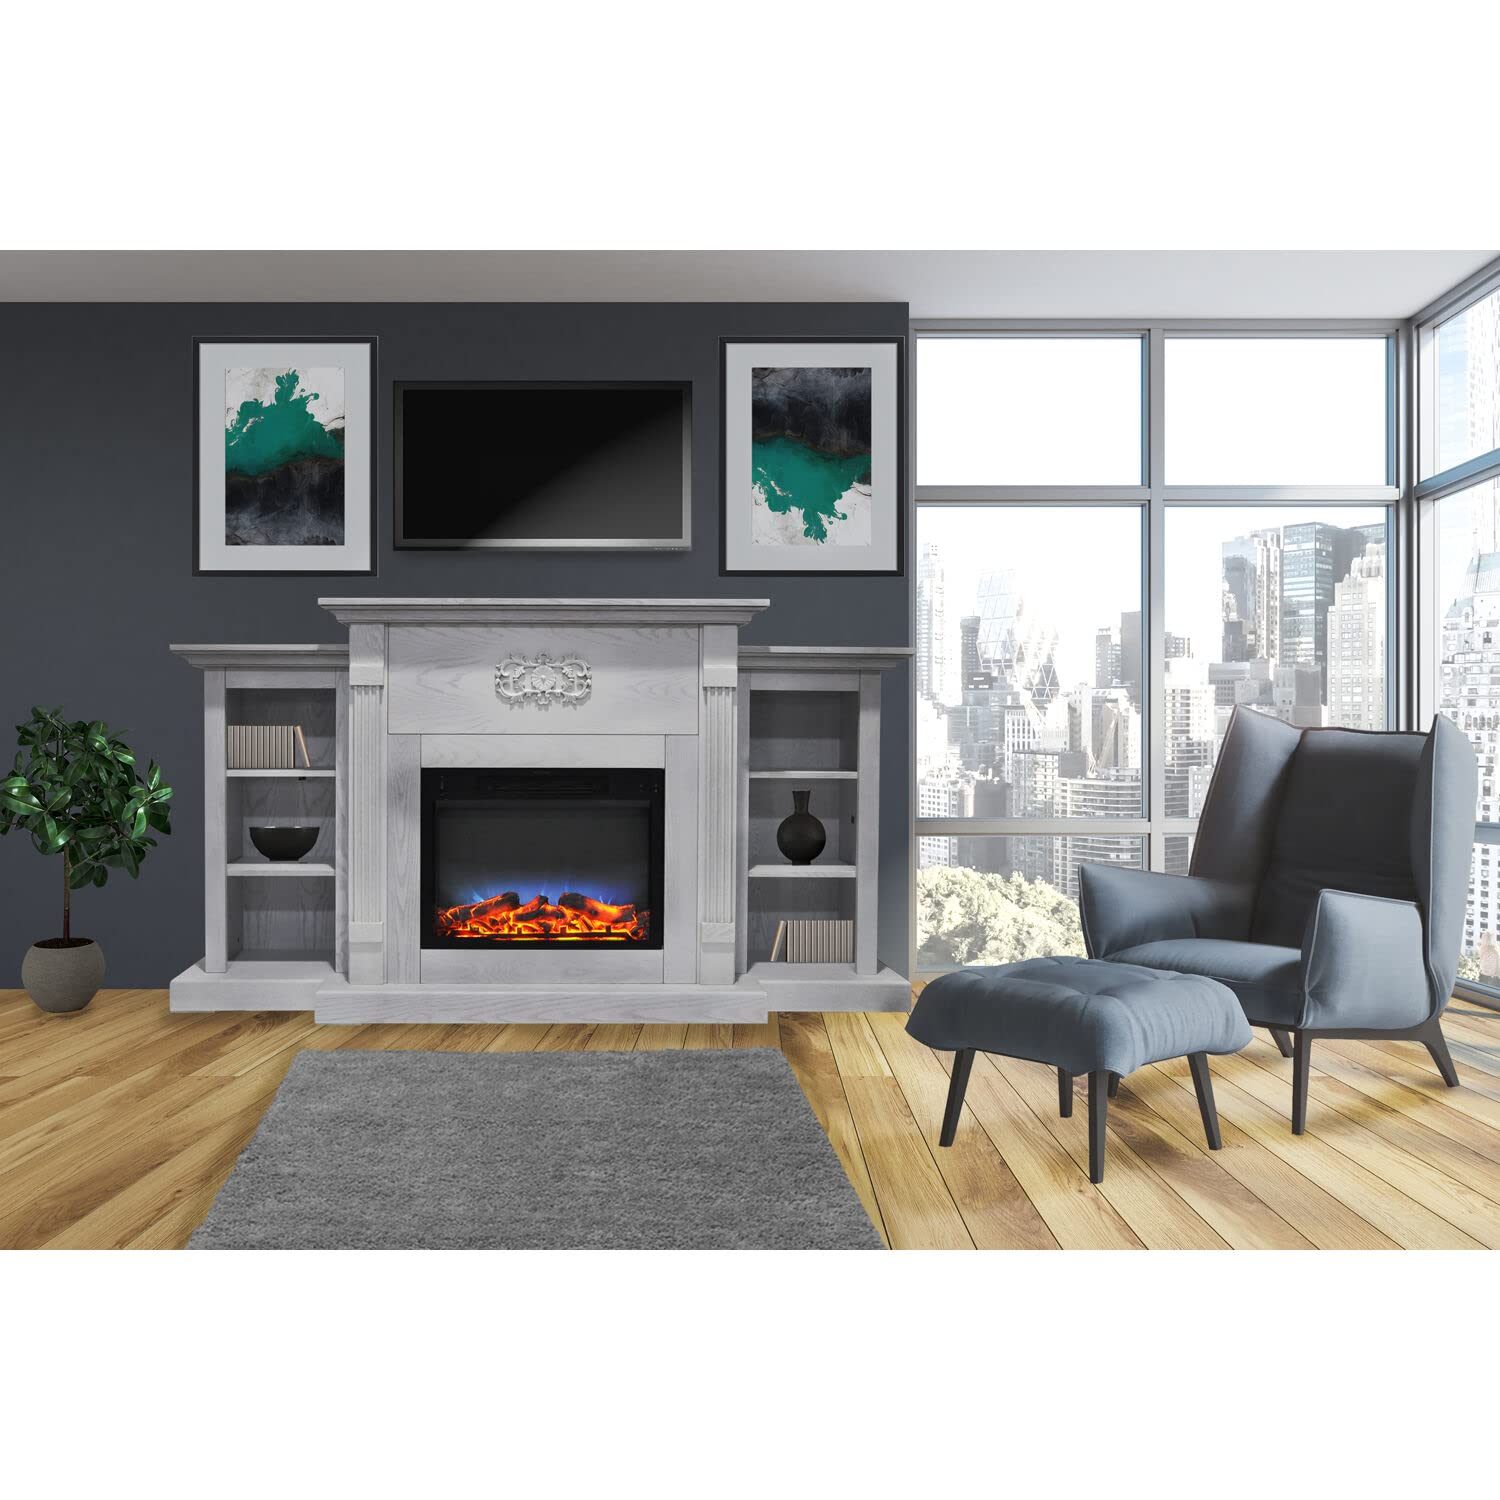 Hanover 72'' Classic White Electric Fireplace with Log Display and LED Multi-Color Realistic Flames, Modern TV Stand Fireplace Heater for Home, Office with Remote Control and Built-in Bookshelves